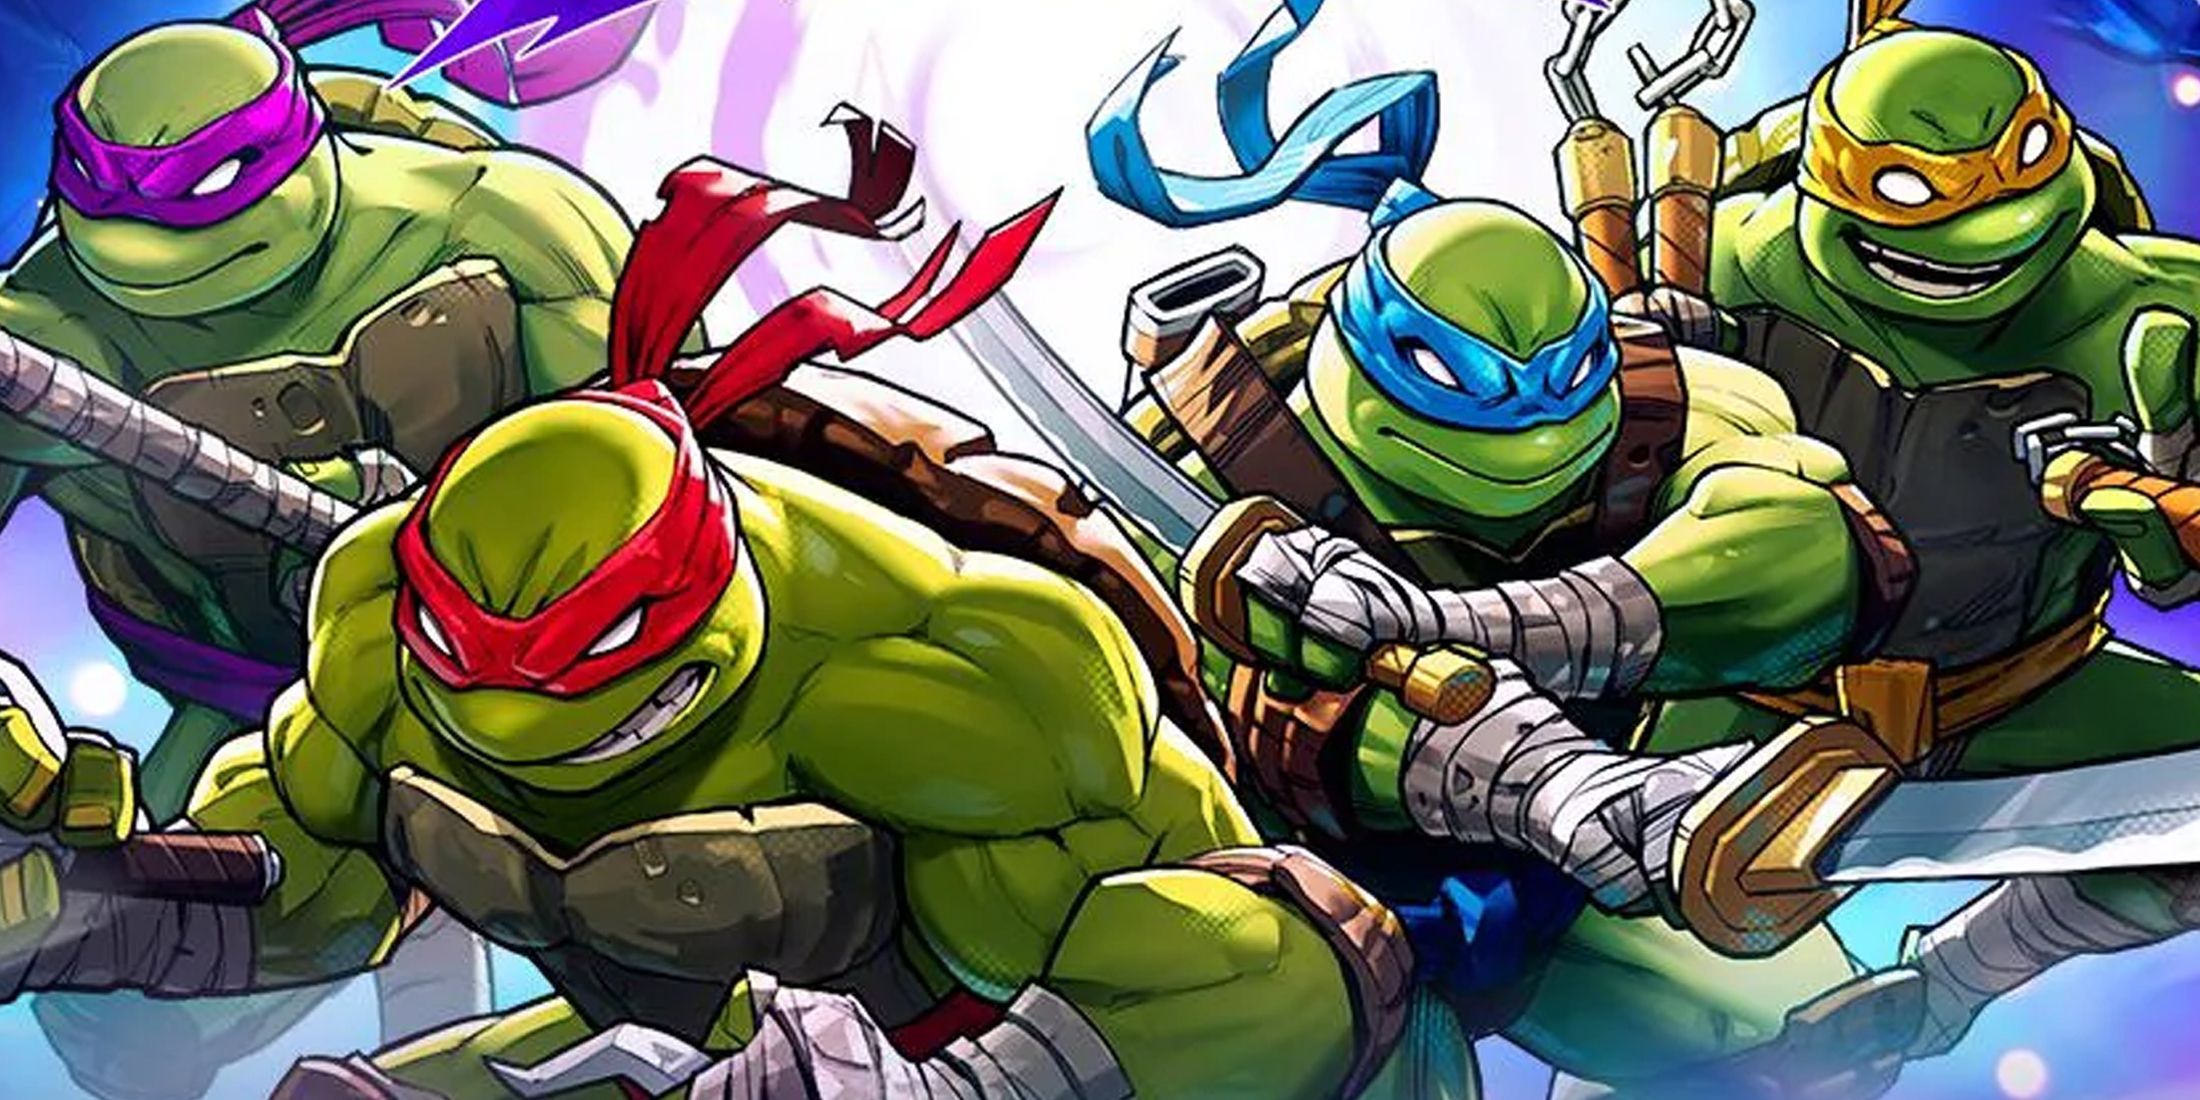 A cover image for Teenage Mutant Ninja Turtles: Splintered Fate, featuring Leo, Raph, Don, and Mikey.